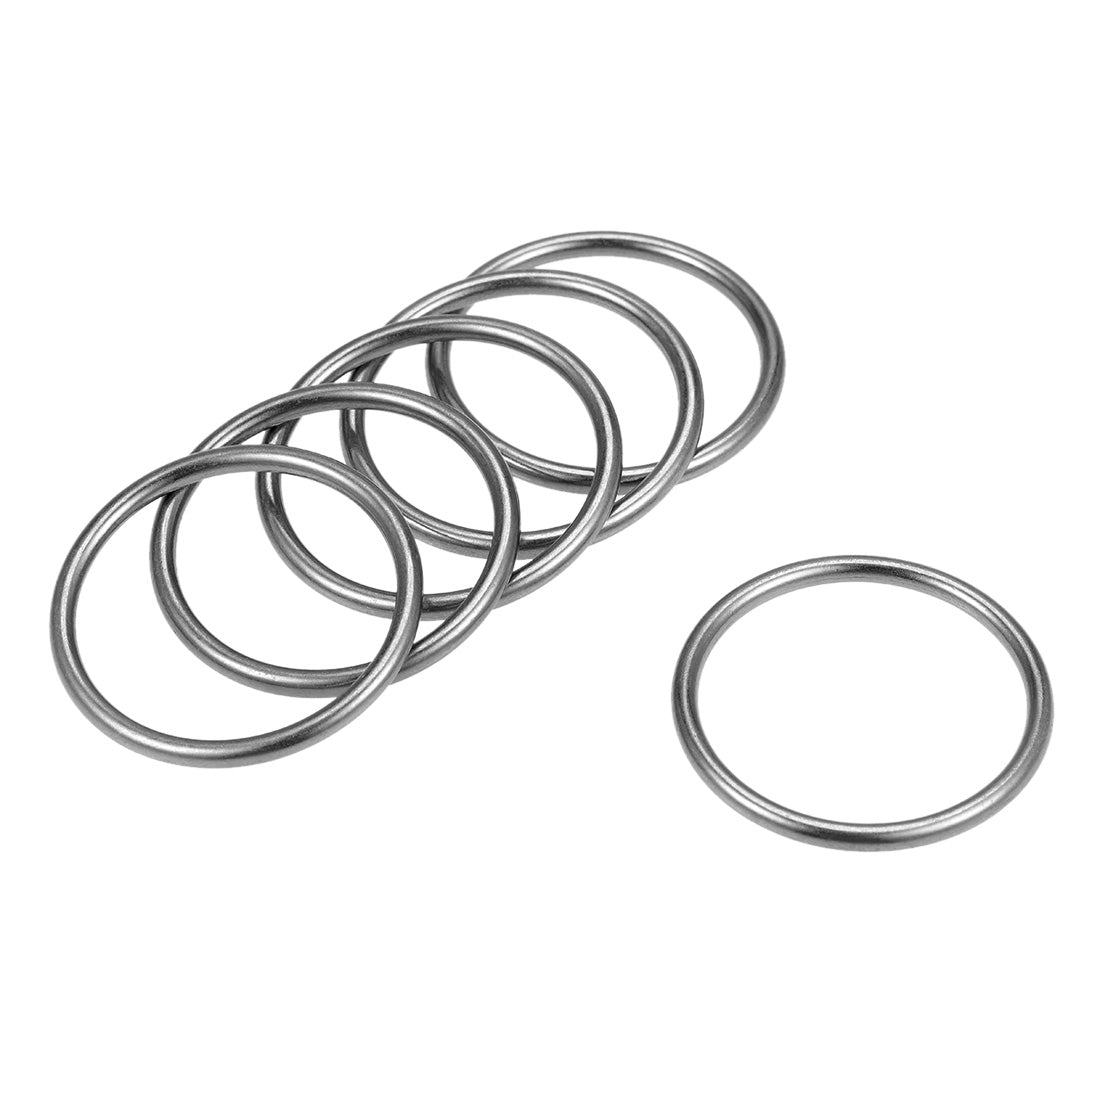 uxcell Uxcell O Ring Buckle 35mm(1.4") ID 3mm Thickness Zinc Alloy O-Rings for Hardware Bags Belts Craft DIY Accessories, Black 6pcs